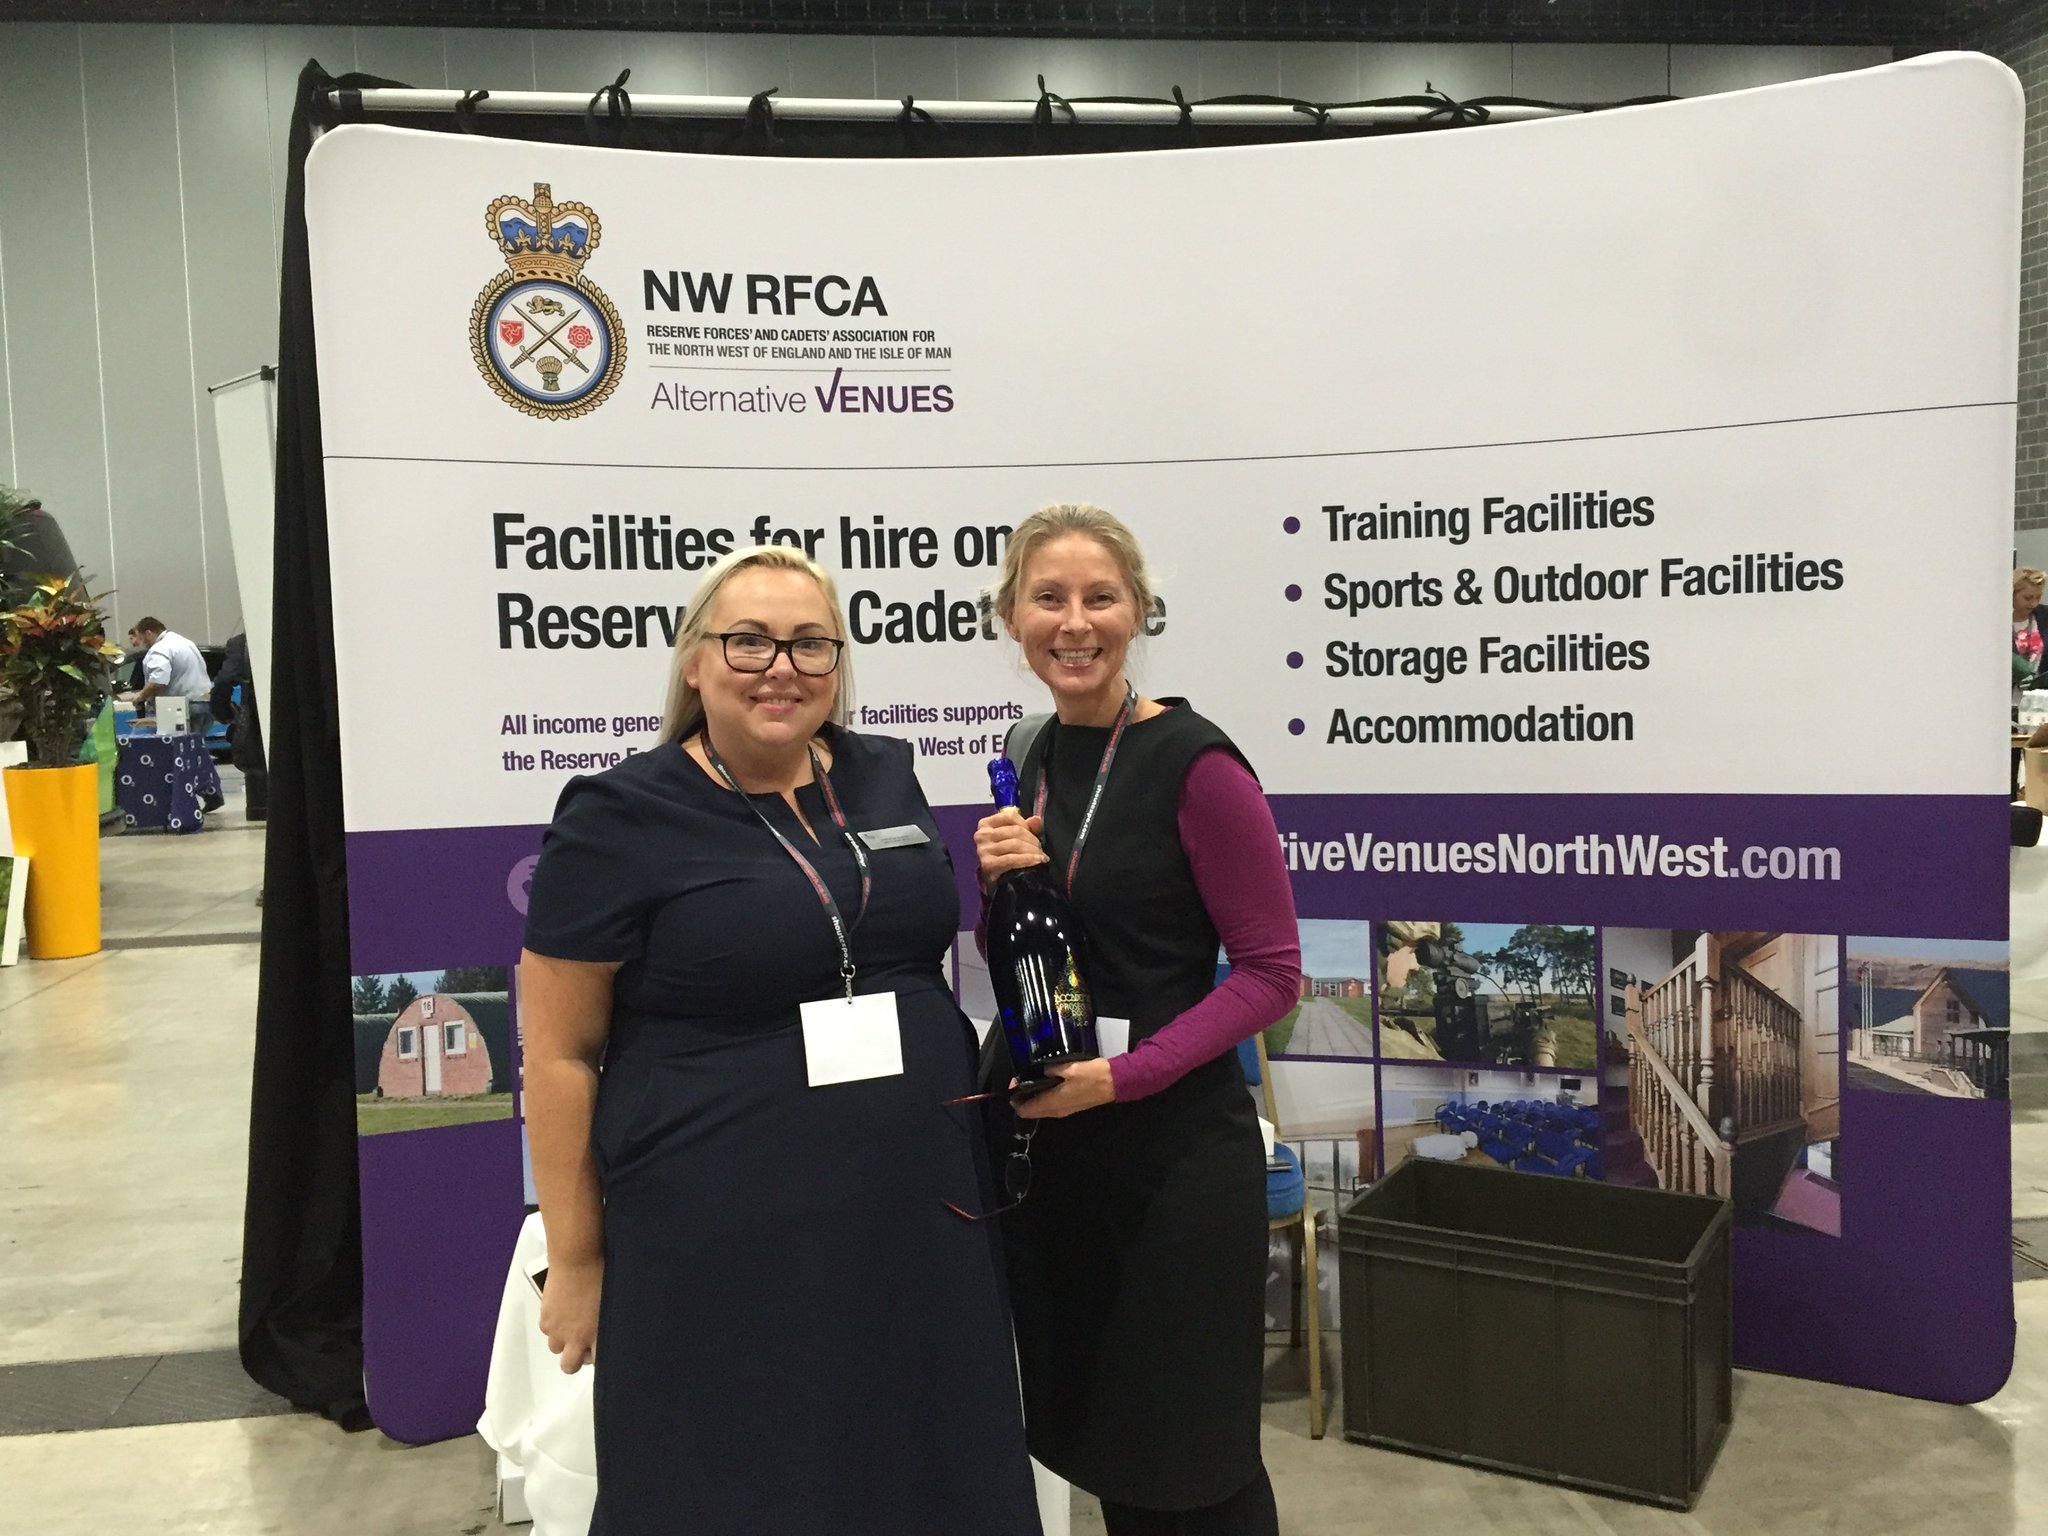 Business Growth Liverpool Wearamask Lovely To Catch Up With Lisa Ashby Dowling From The Liverpoollep Today At Mbexpo18 And Lucky Lisa Won A Prize Too From Nwrfca Av